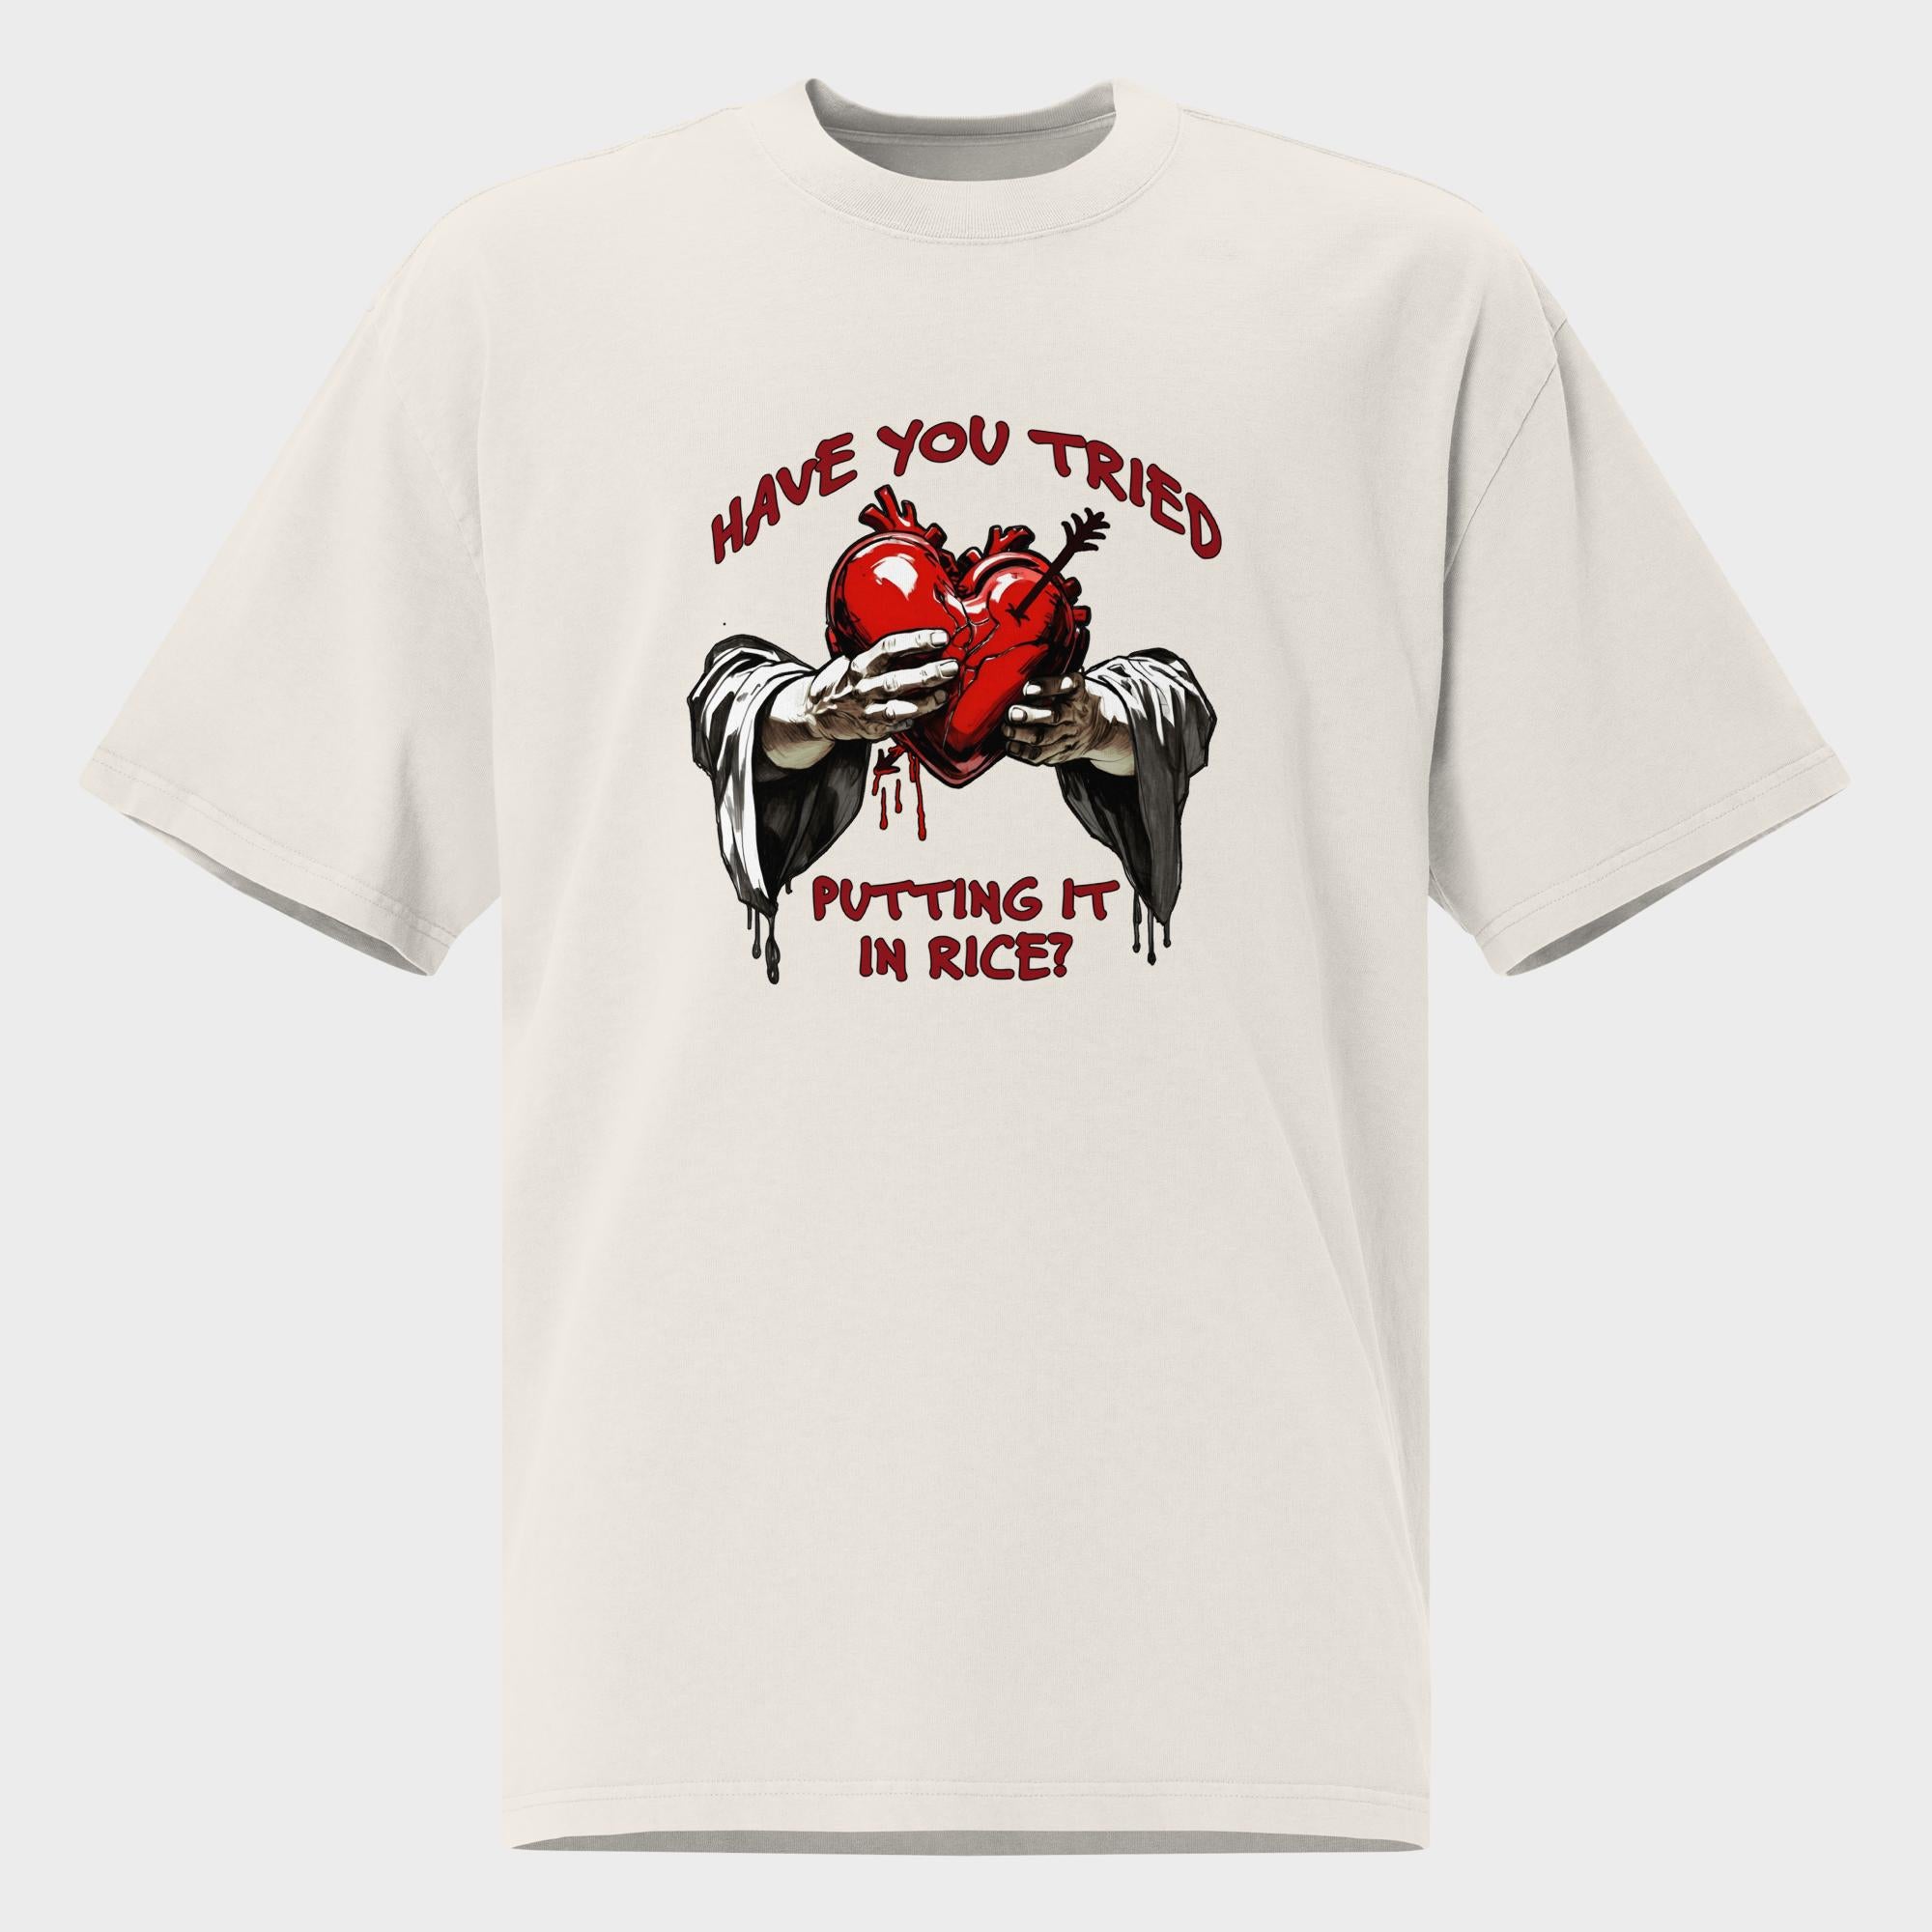 Have You Tried Putting It In Rice? - Oversized T-Shirt